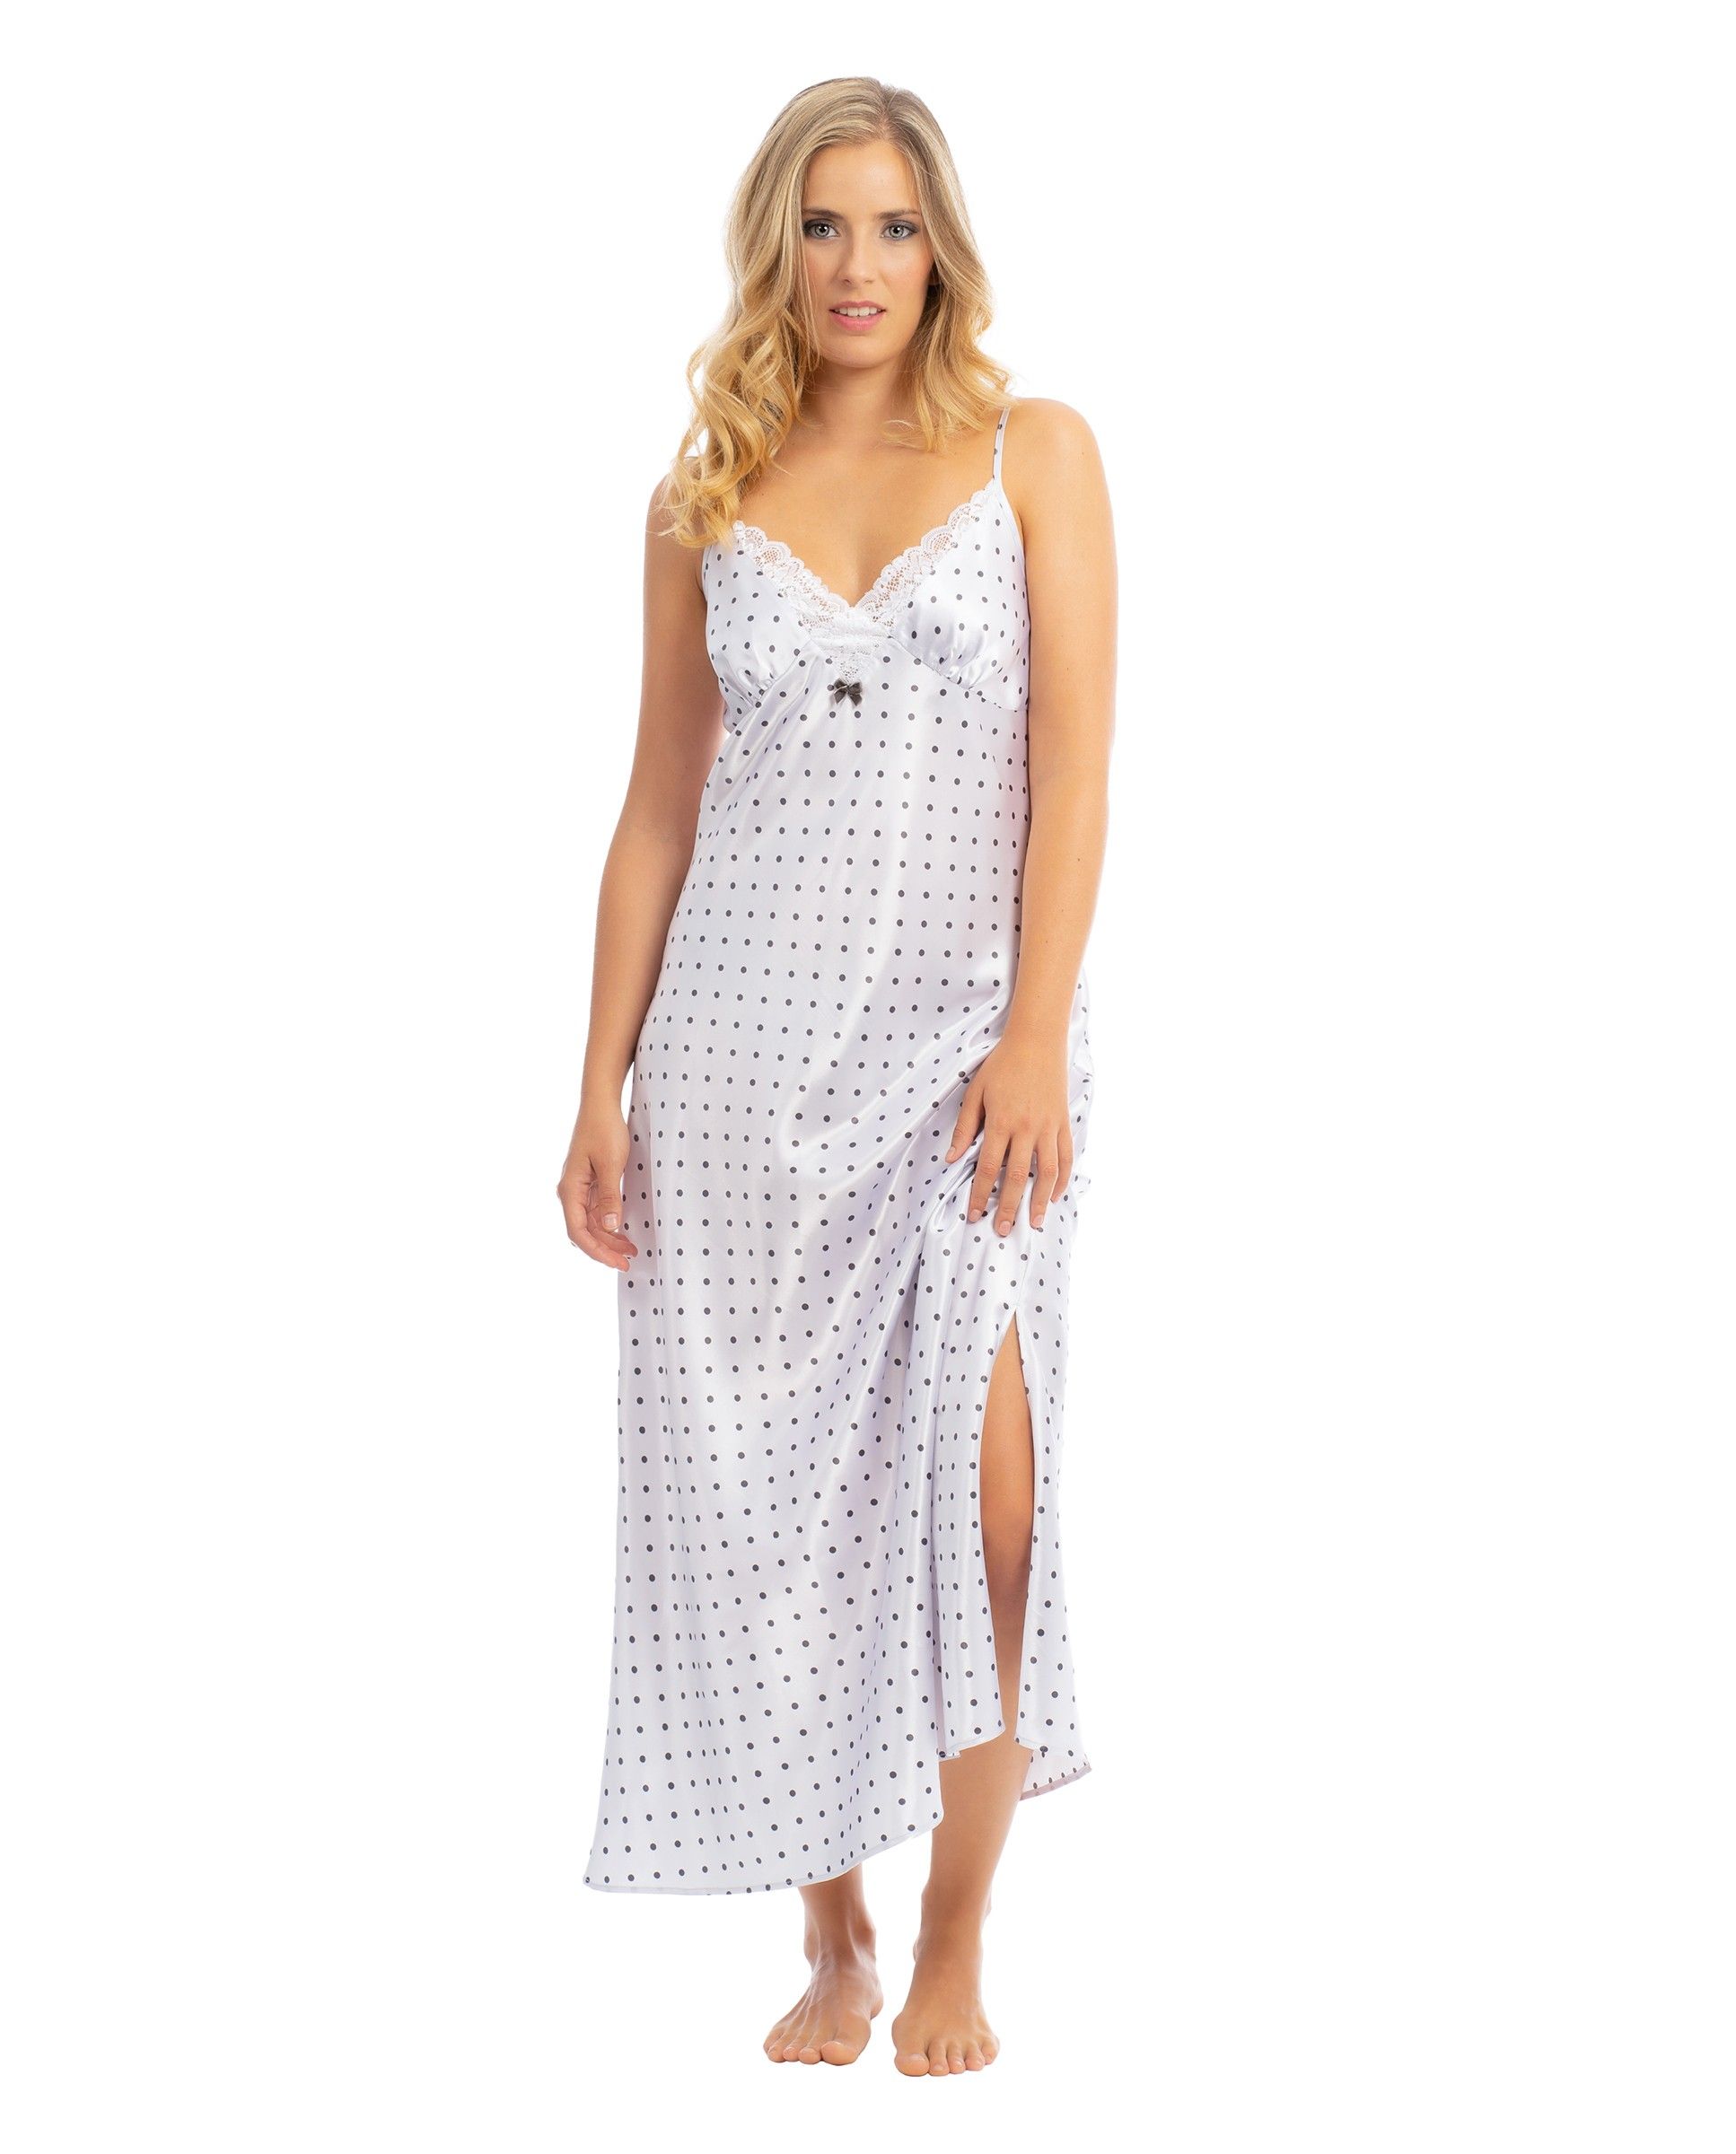 Women's long white satin nightgown with polka dot print and lace trim at neckline